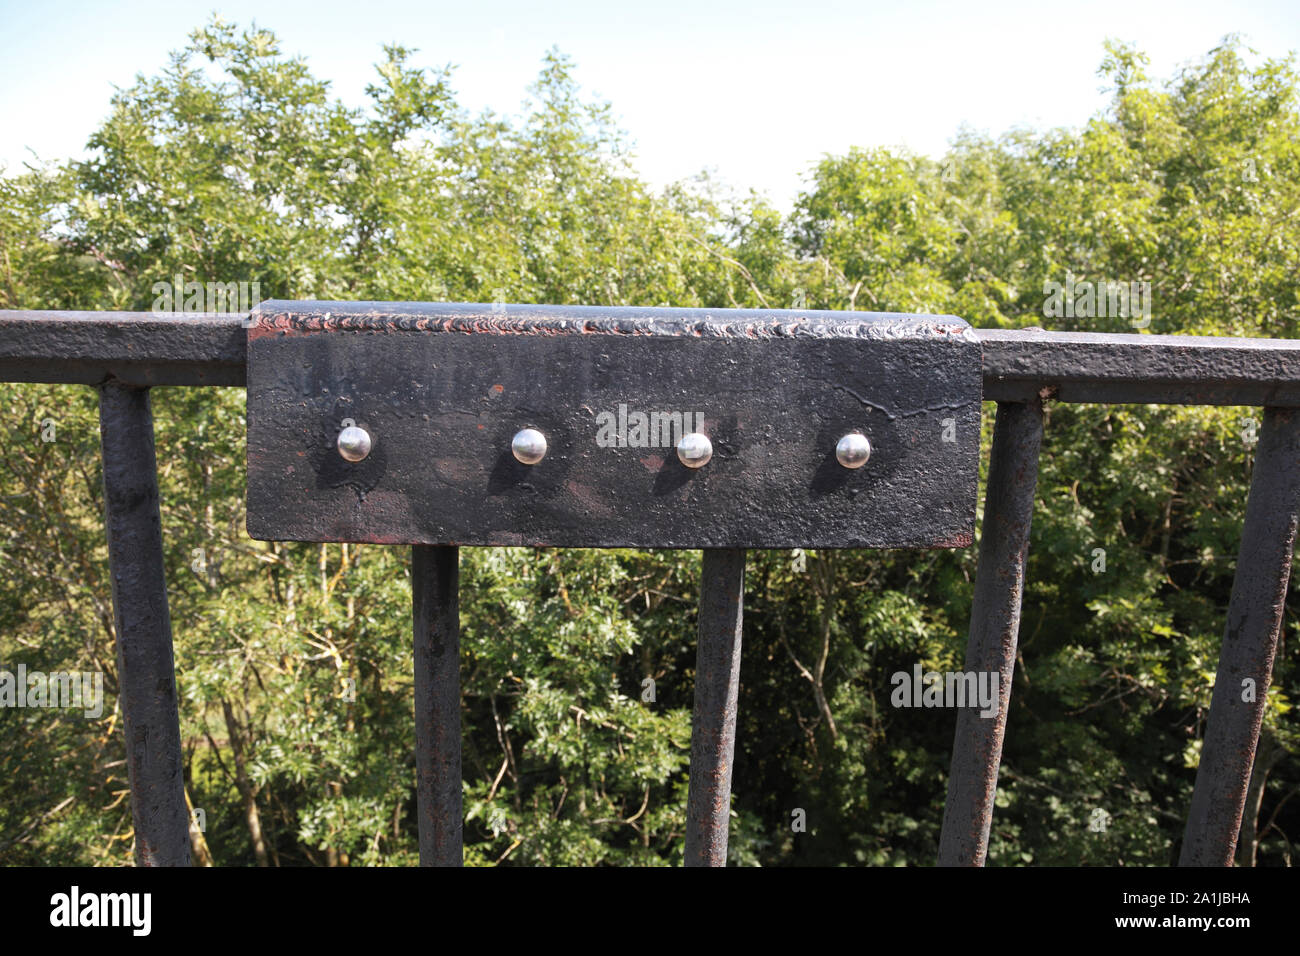 Detail of the railing next to the towpath on Pontcysyllte Aqueduct which carries the Llangollen Canal over the river Dee Stock Photo